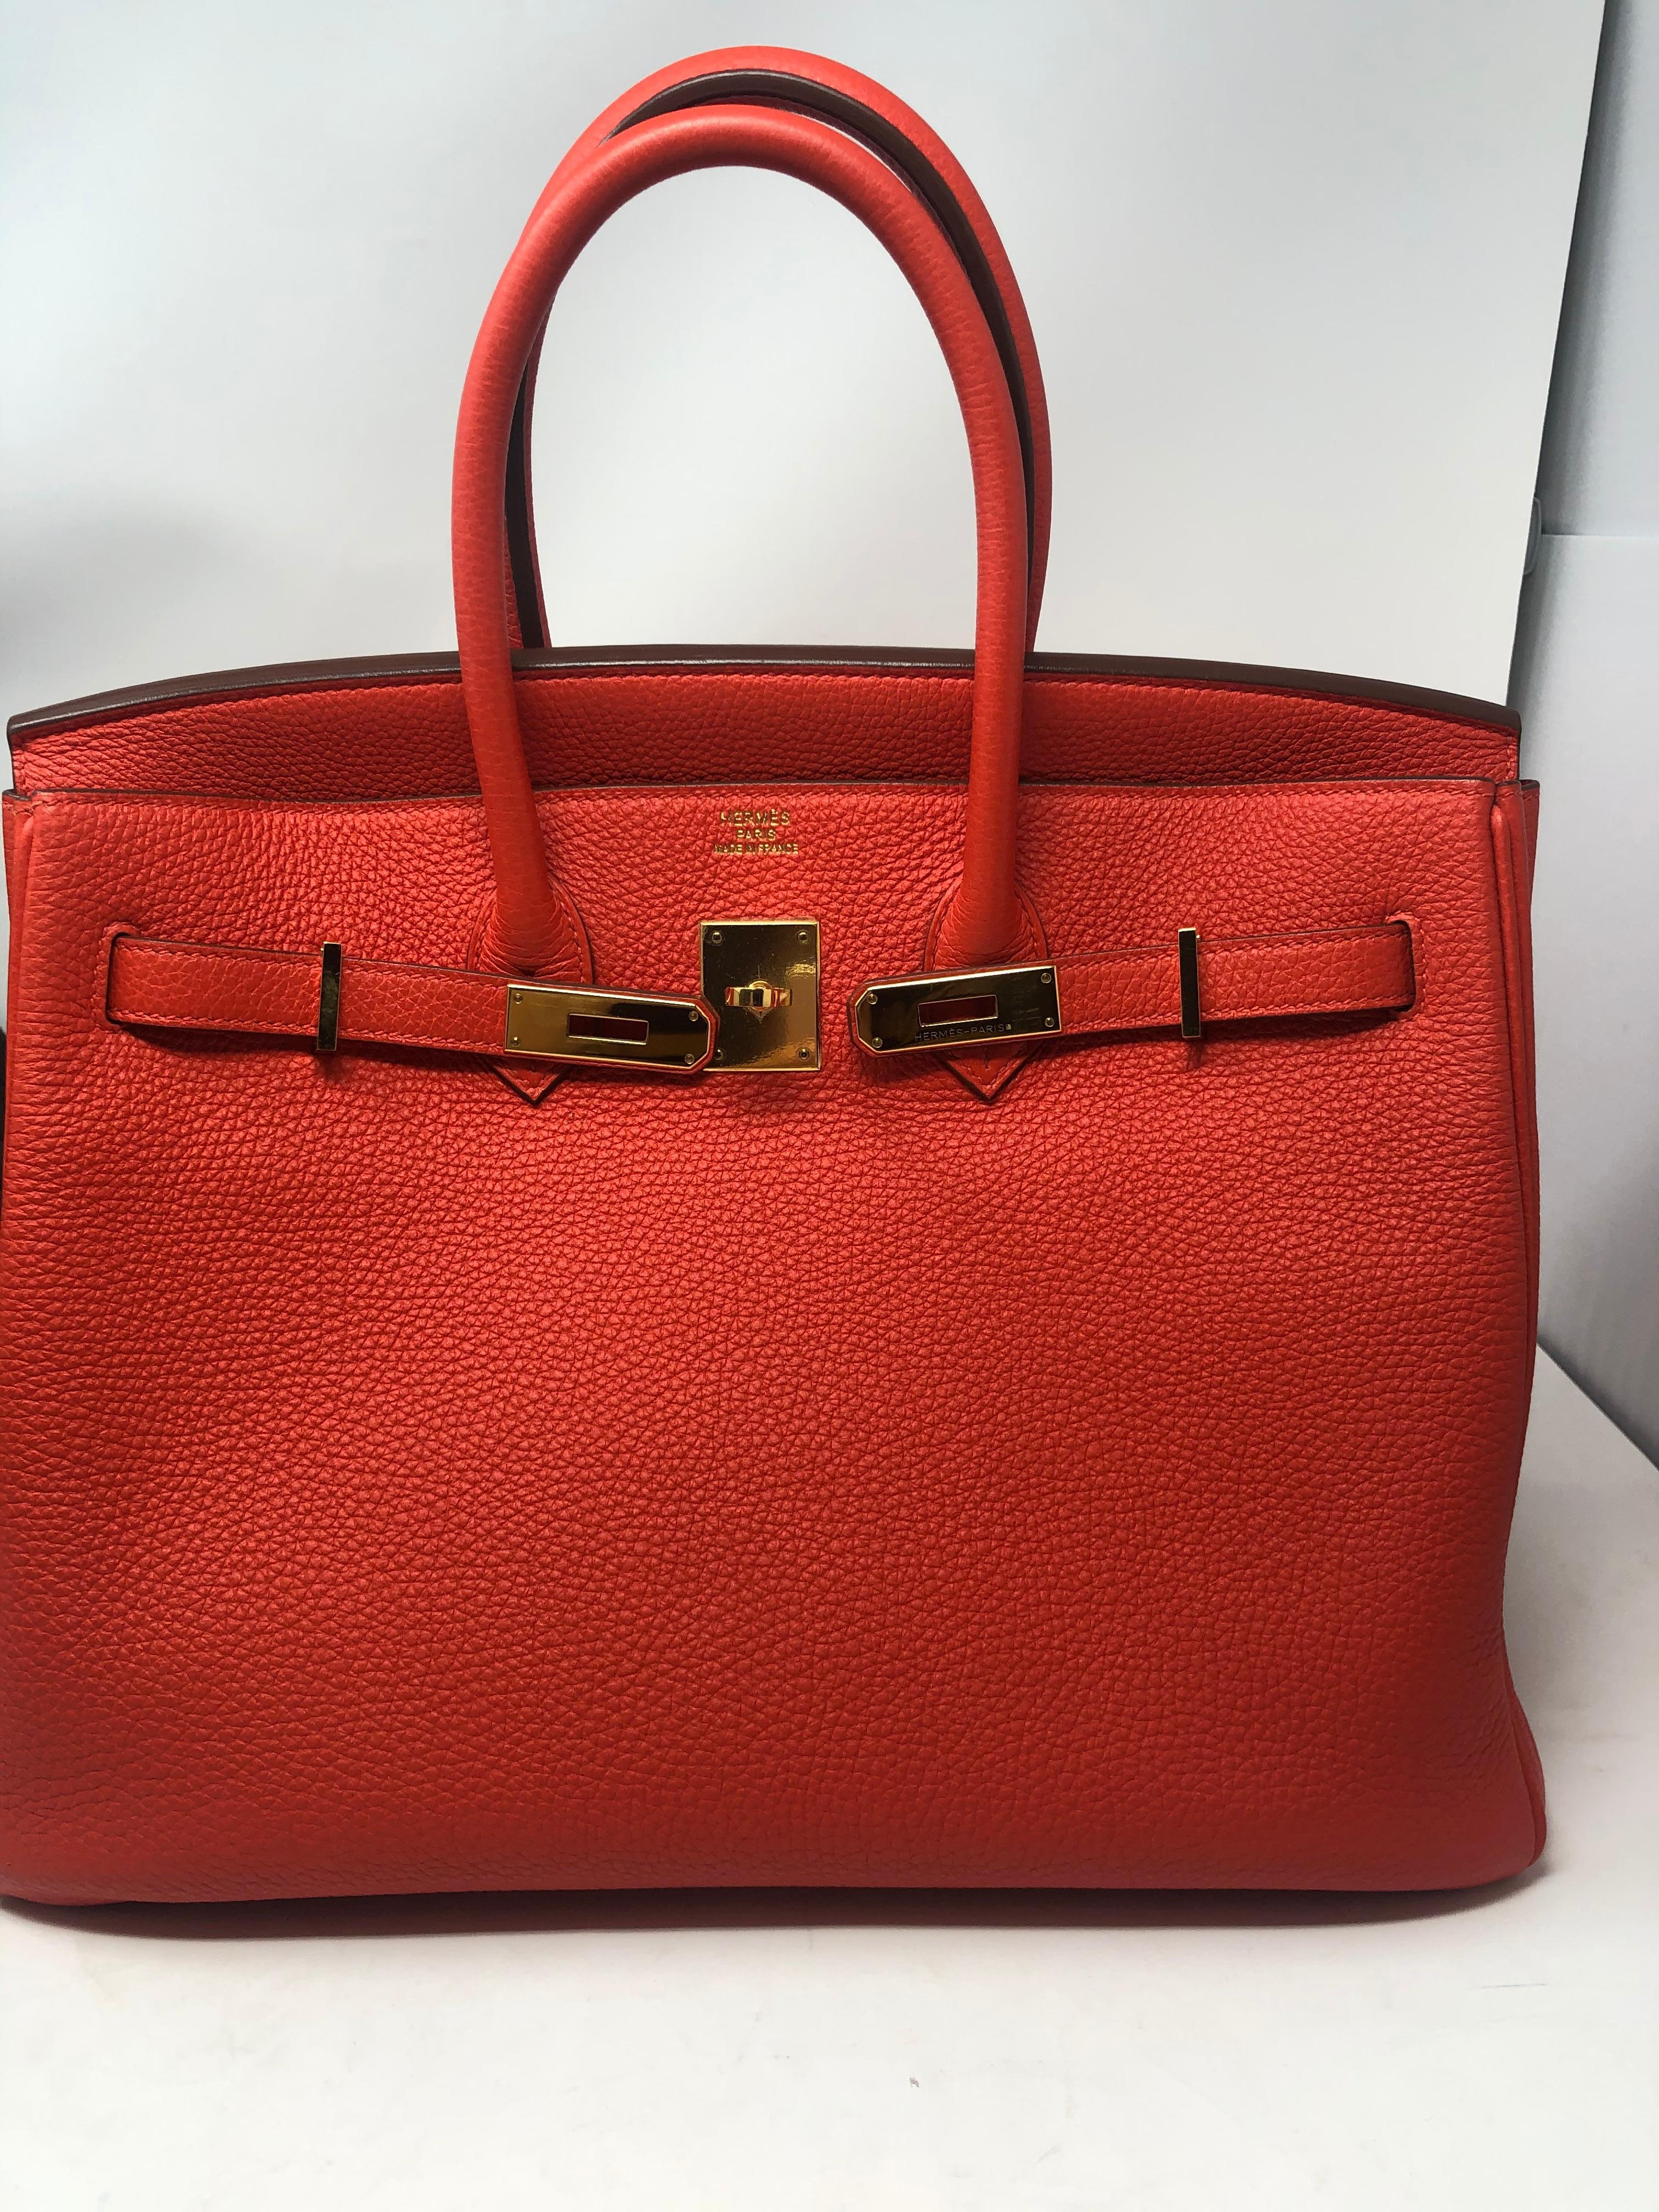 Hermes Birkin 35 Cappucine Veau Togo Leather Bag. Gold hardware. From 2013. Q square. Mint like new condition. Rare orange/ red color like poppy. Includes full set. Dust cover, lock, keys, clochette, rain jacket and box. Includes Bababebi